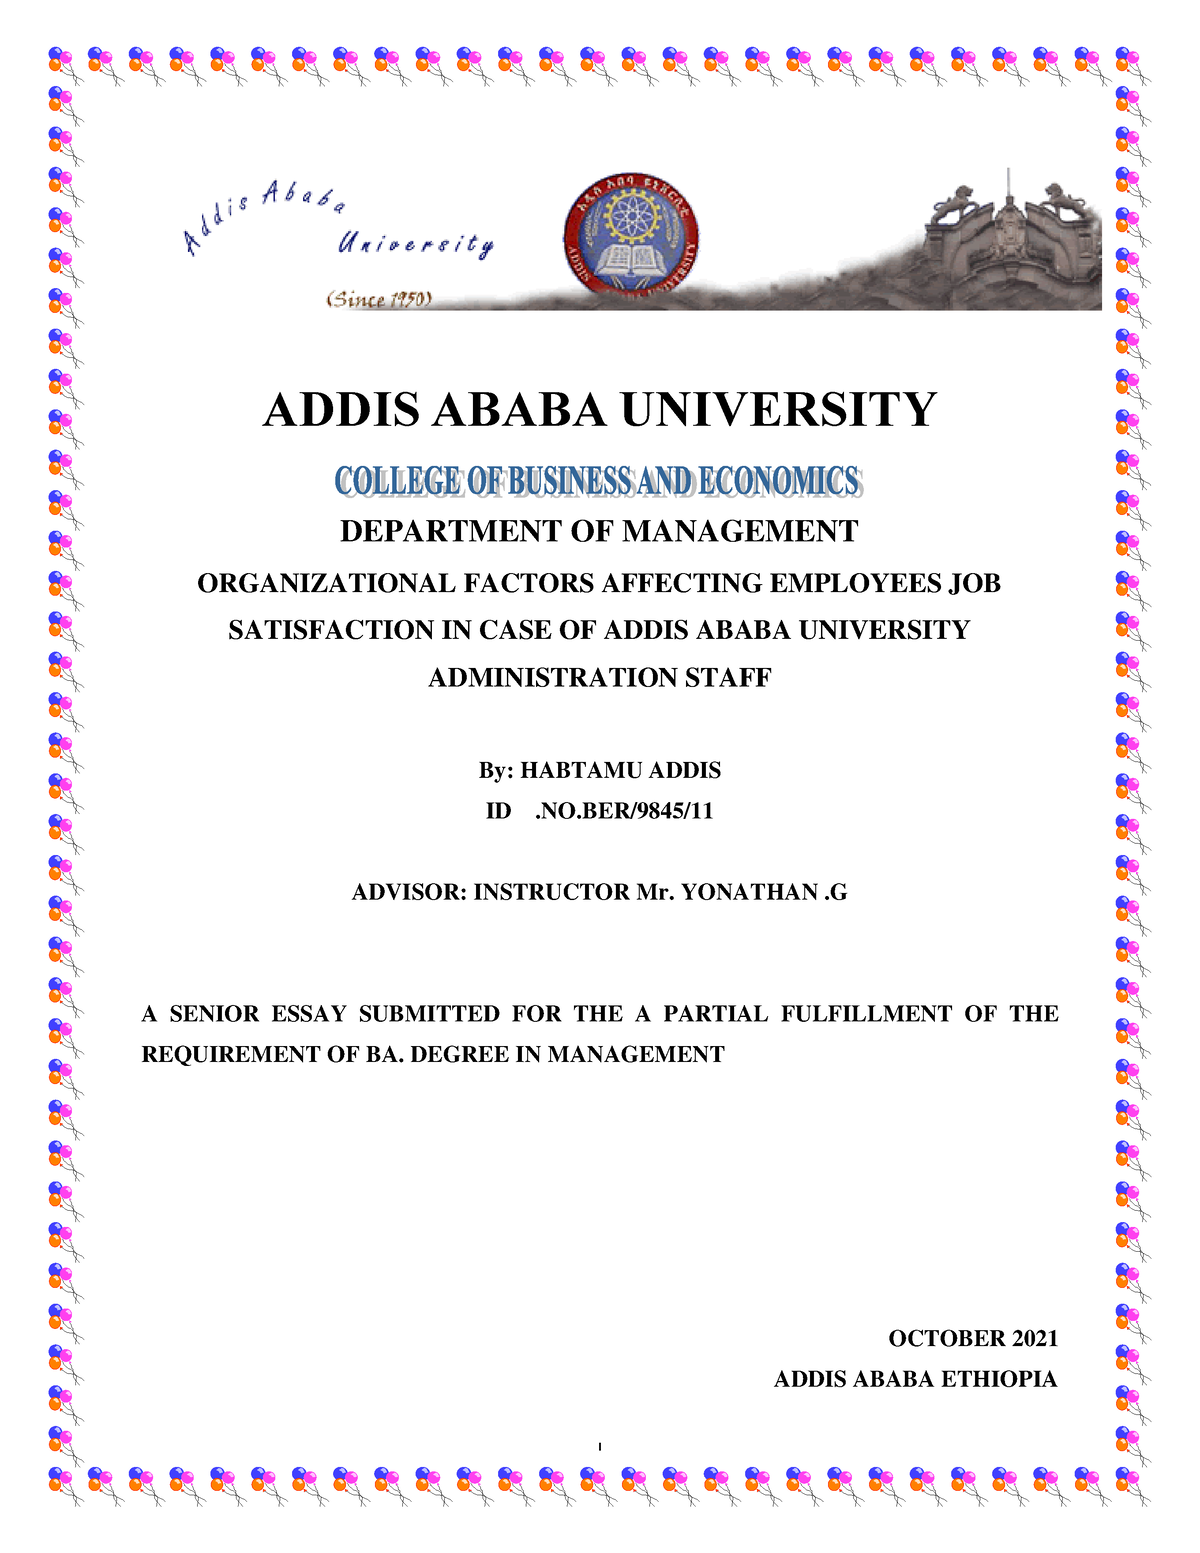 addis ababa university management research paper